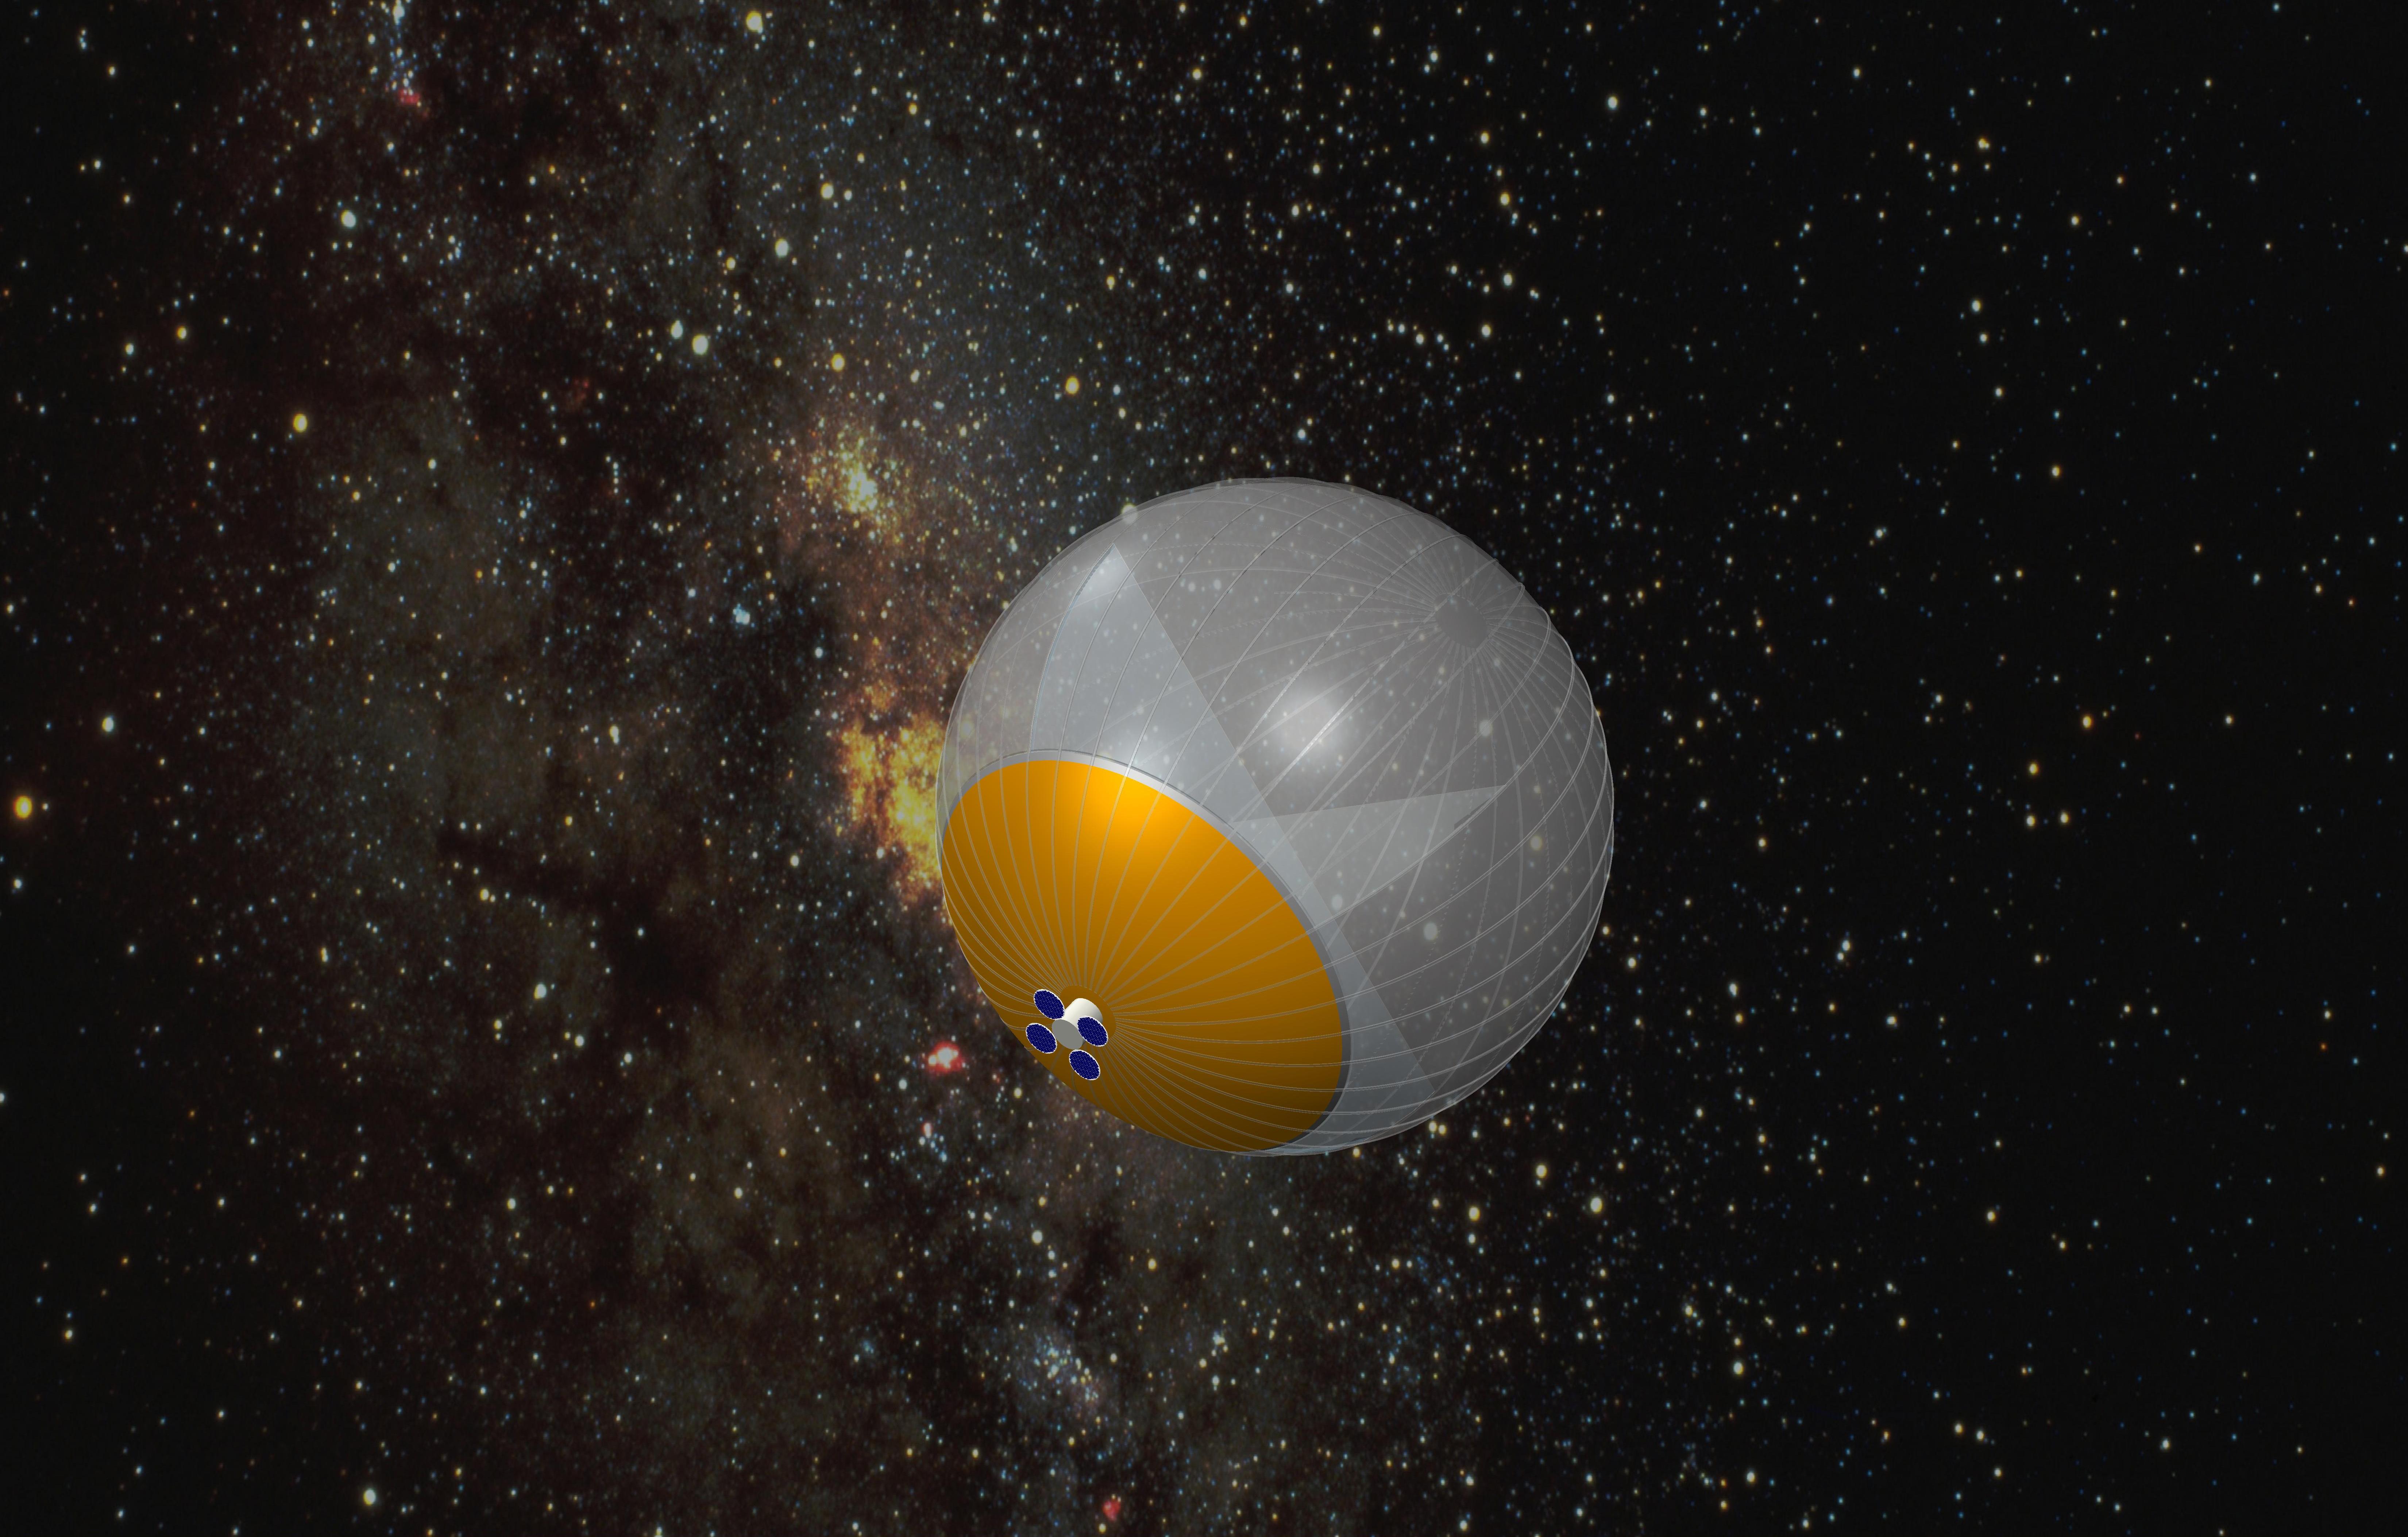 Telescopes May Ride Giant Balloons to Better See the Stars